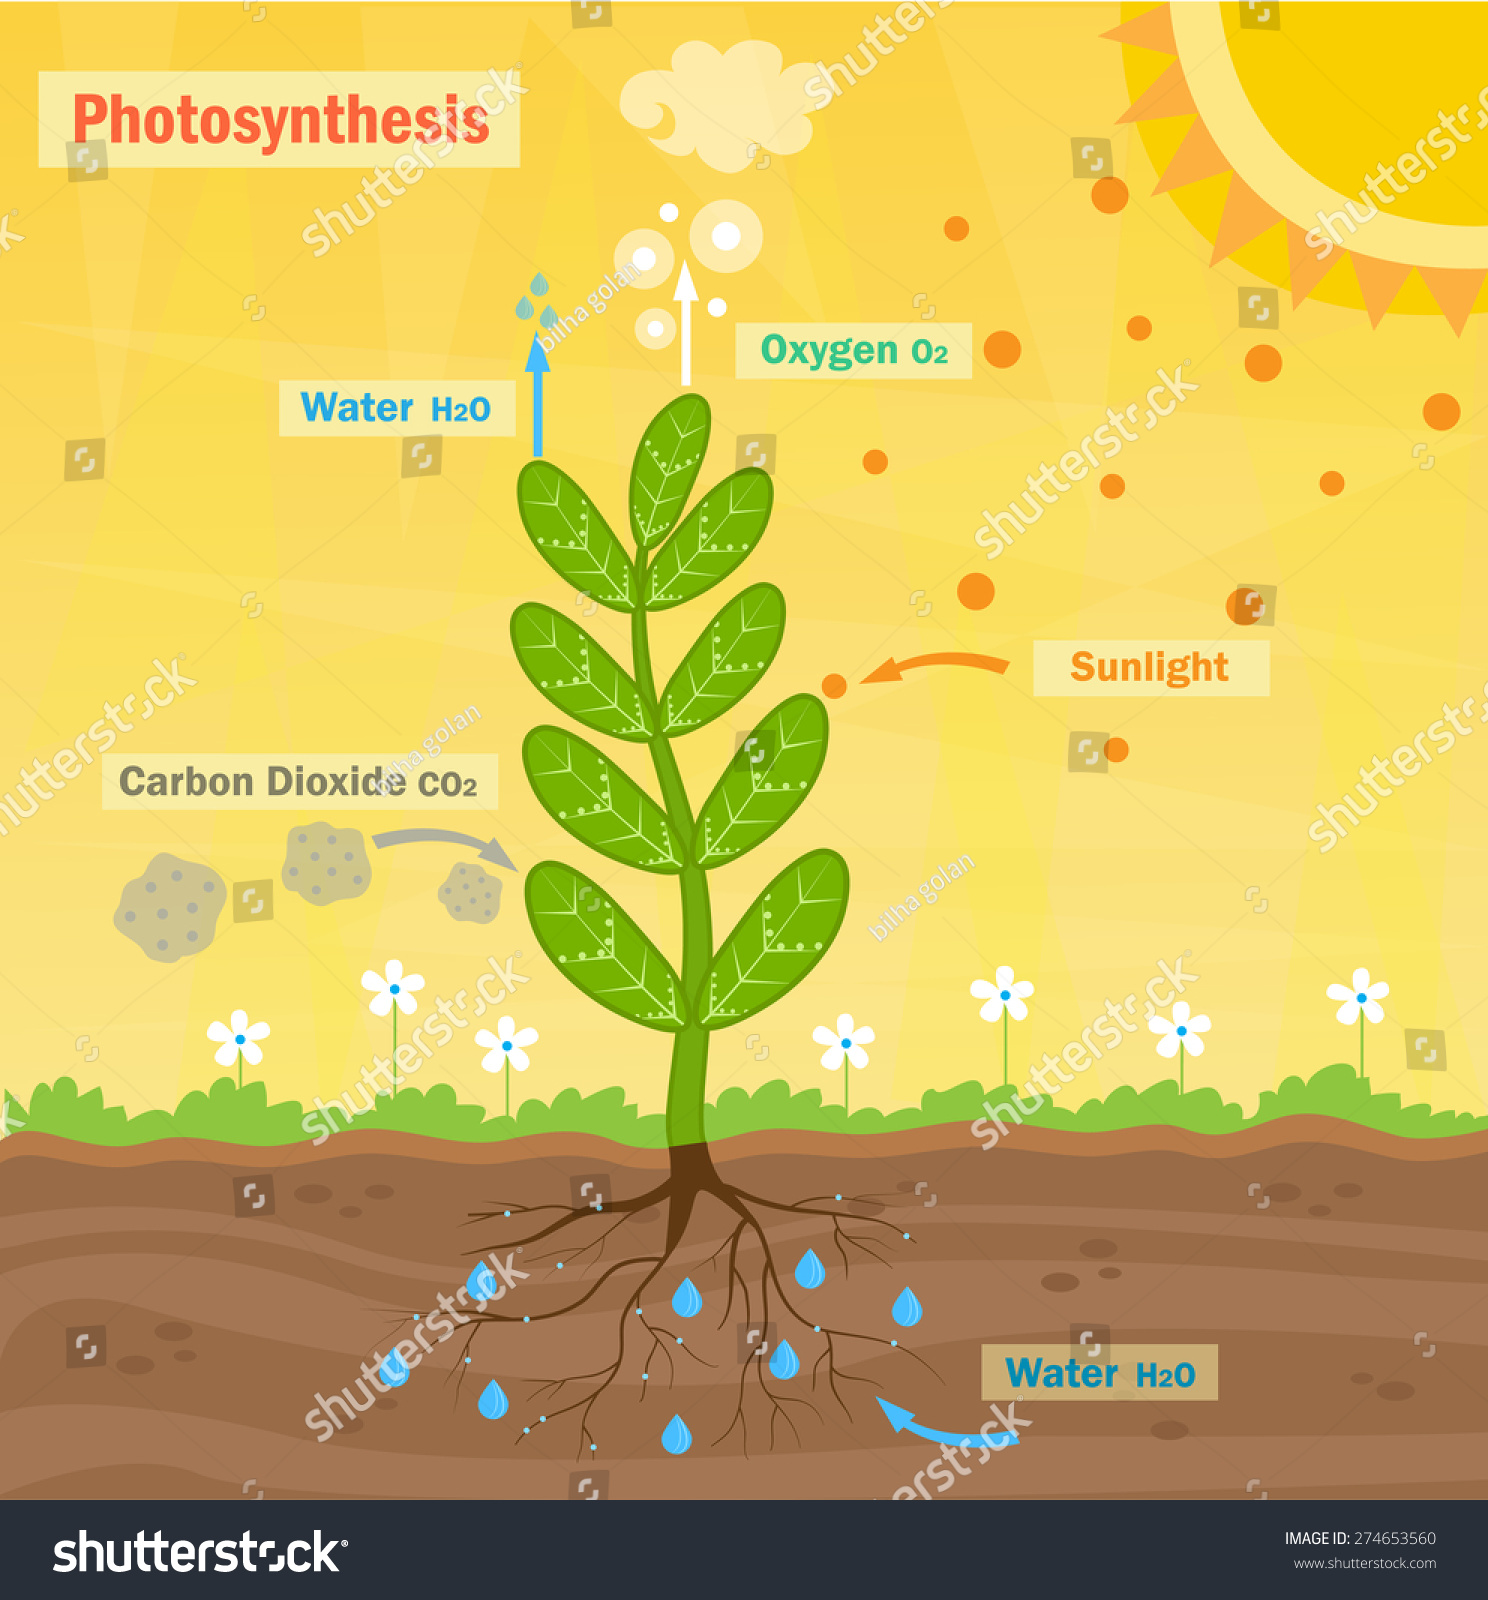 Photosynthesis - Colorful Illustration Of The Photosynthesis Process ...